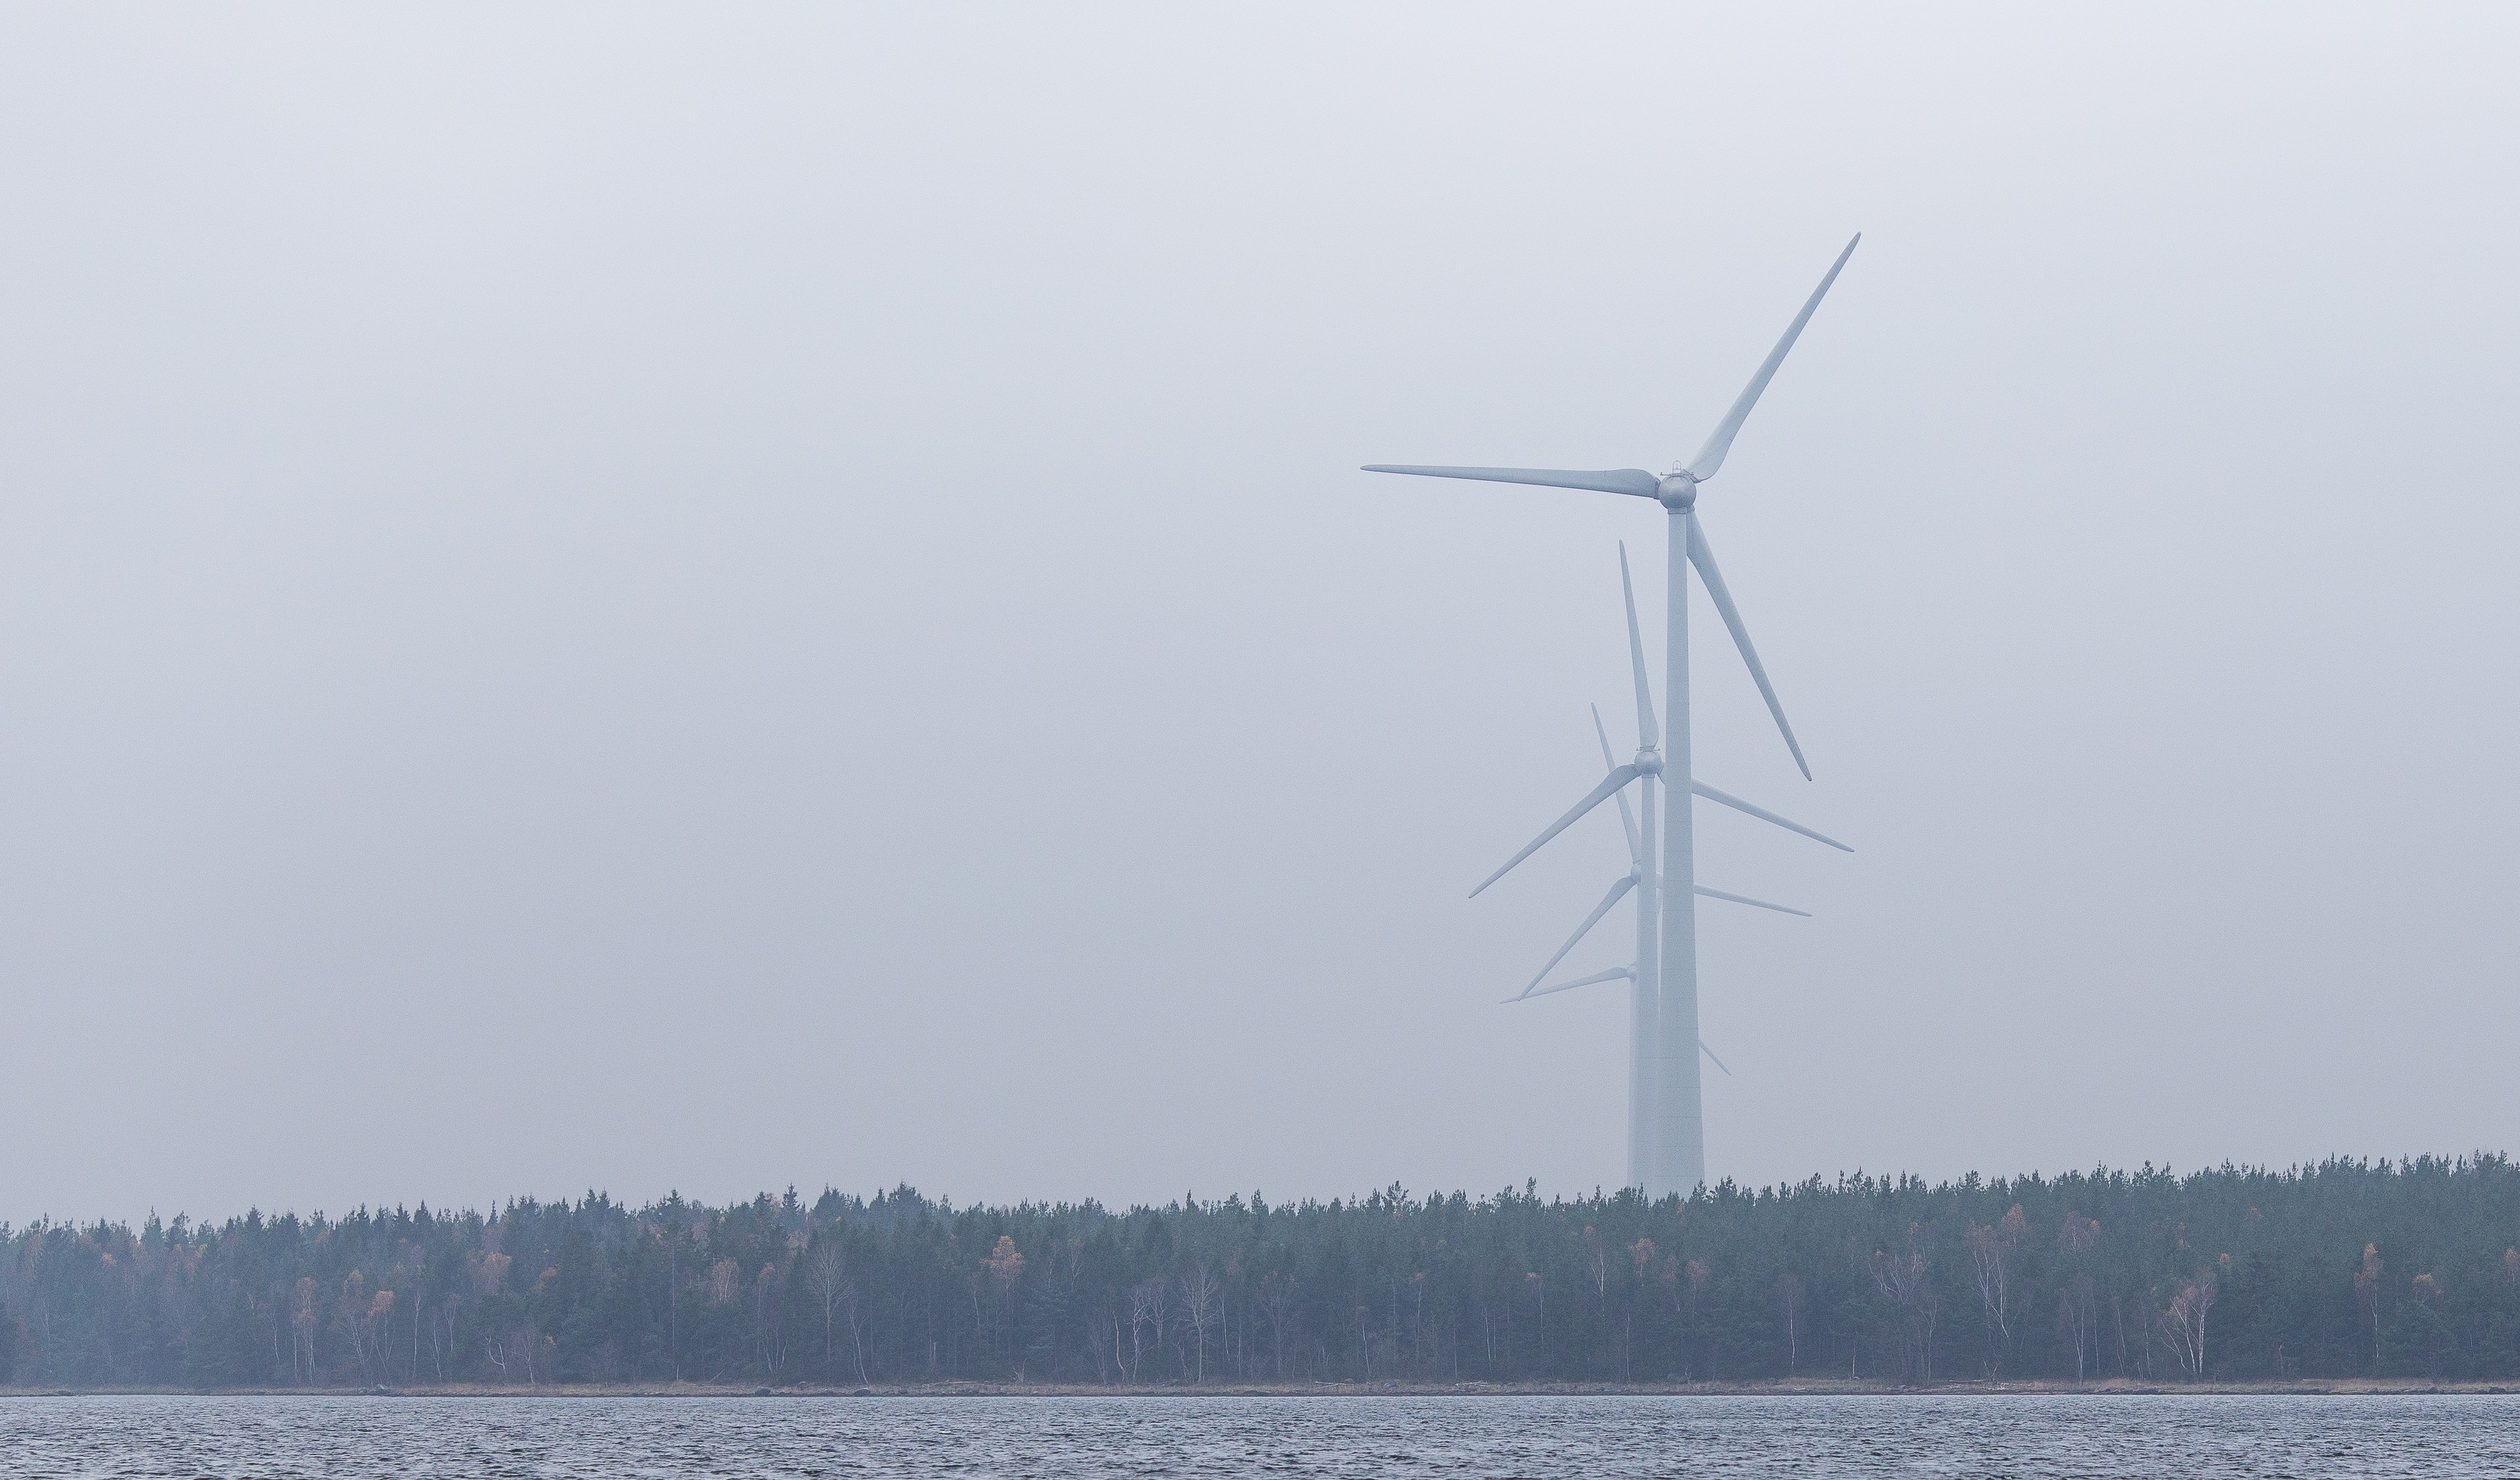 white windmills under gray cloudy sky during daytime